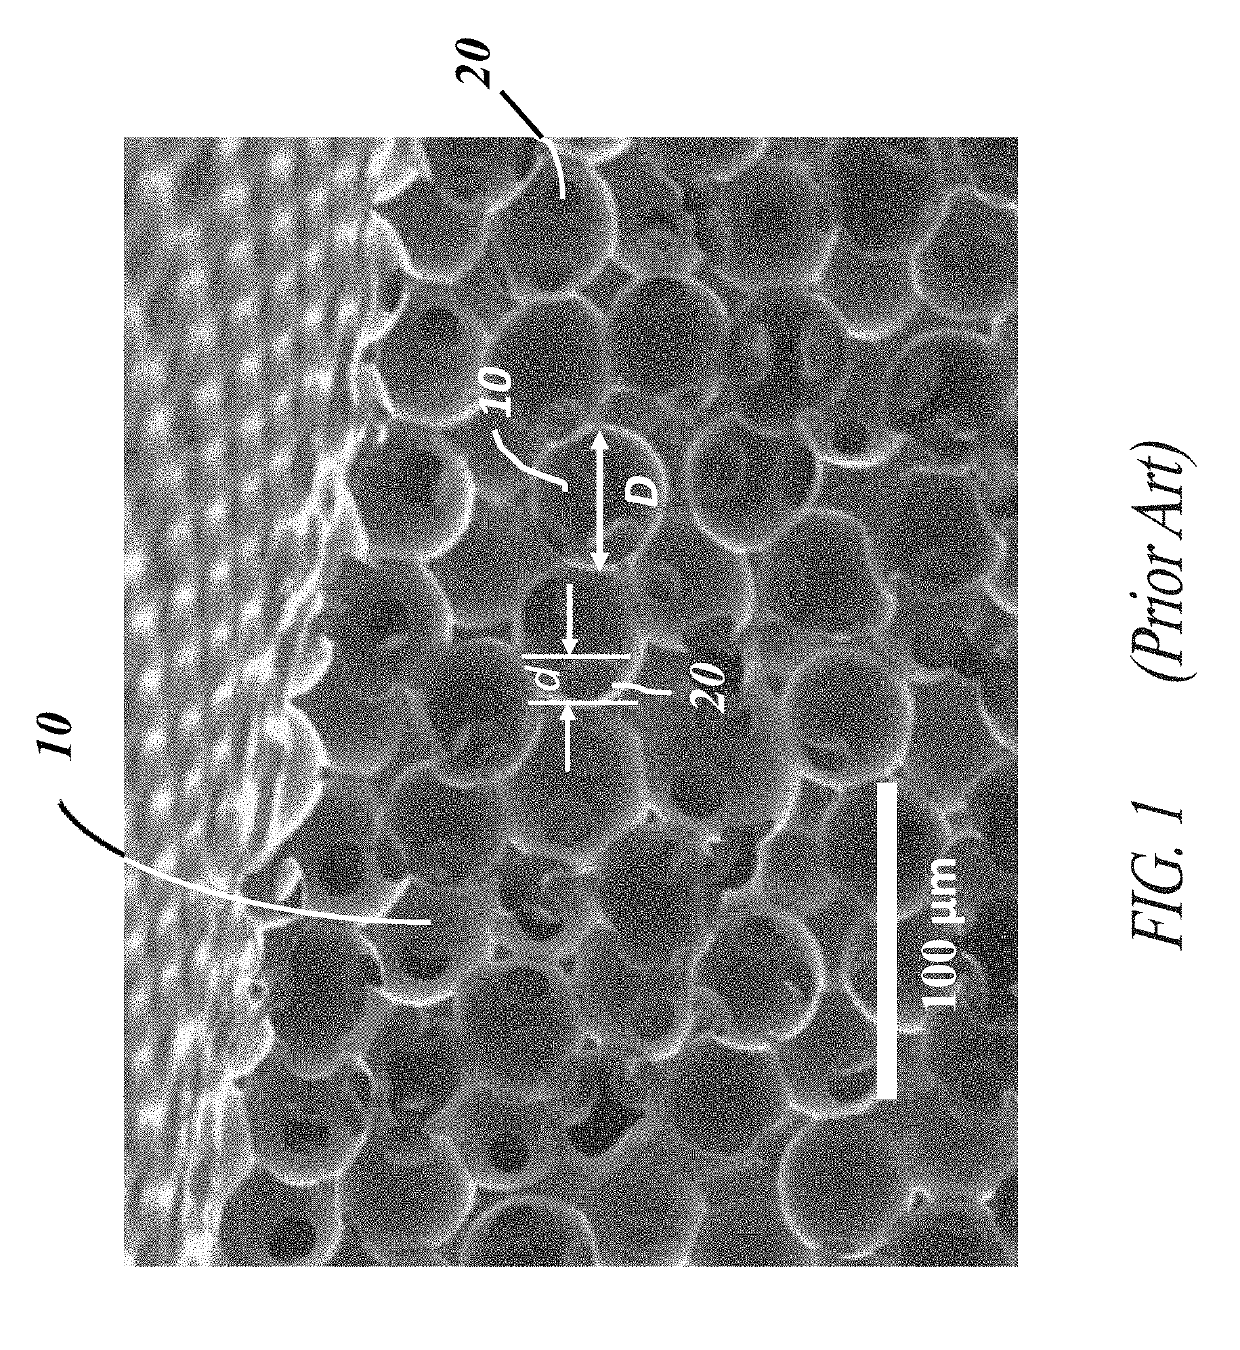 Corrugated microporous tissue interface for improved performance and infection resistance of vascular grafts and other implantable devices